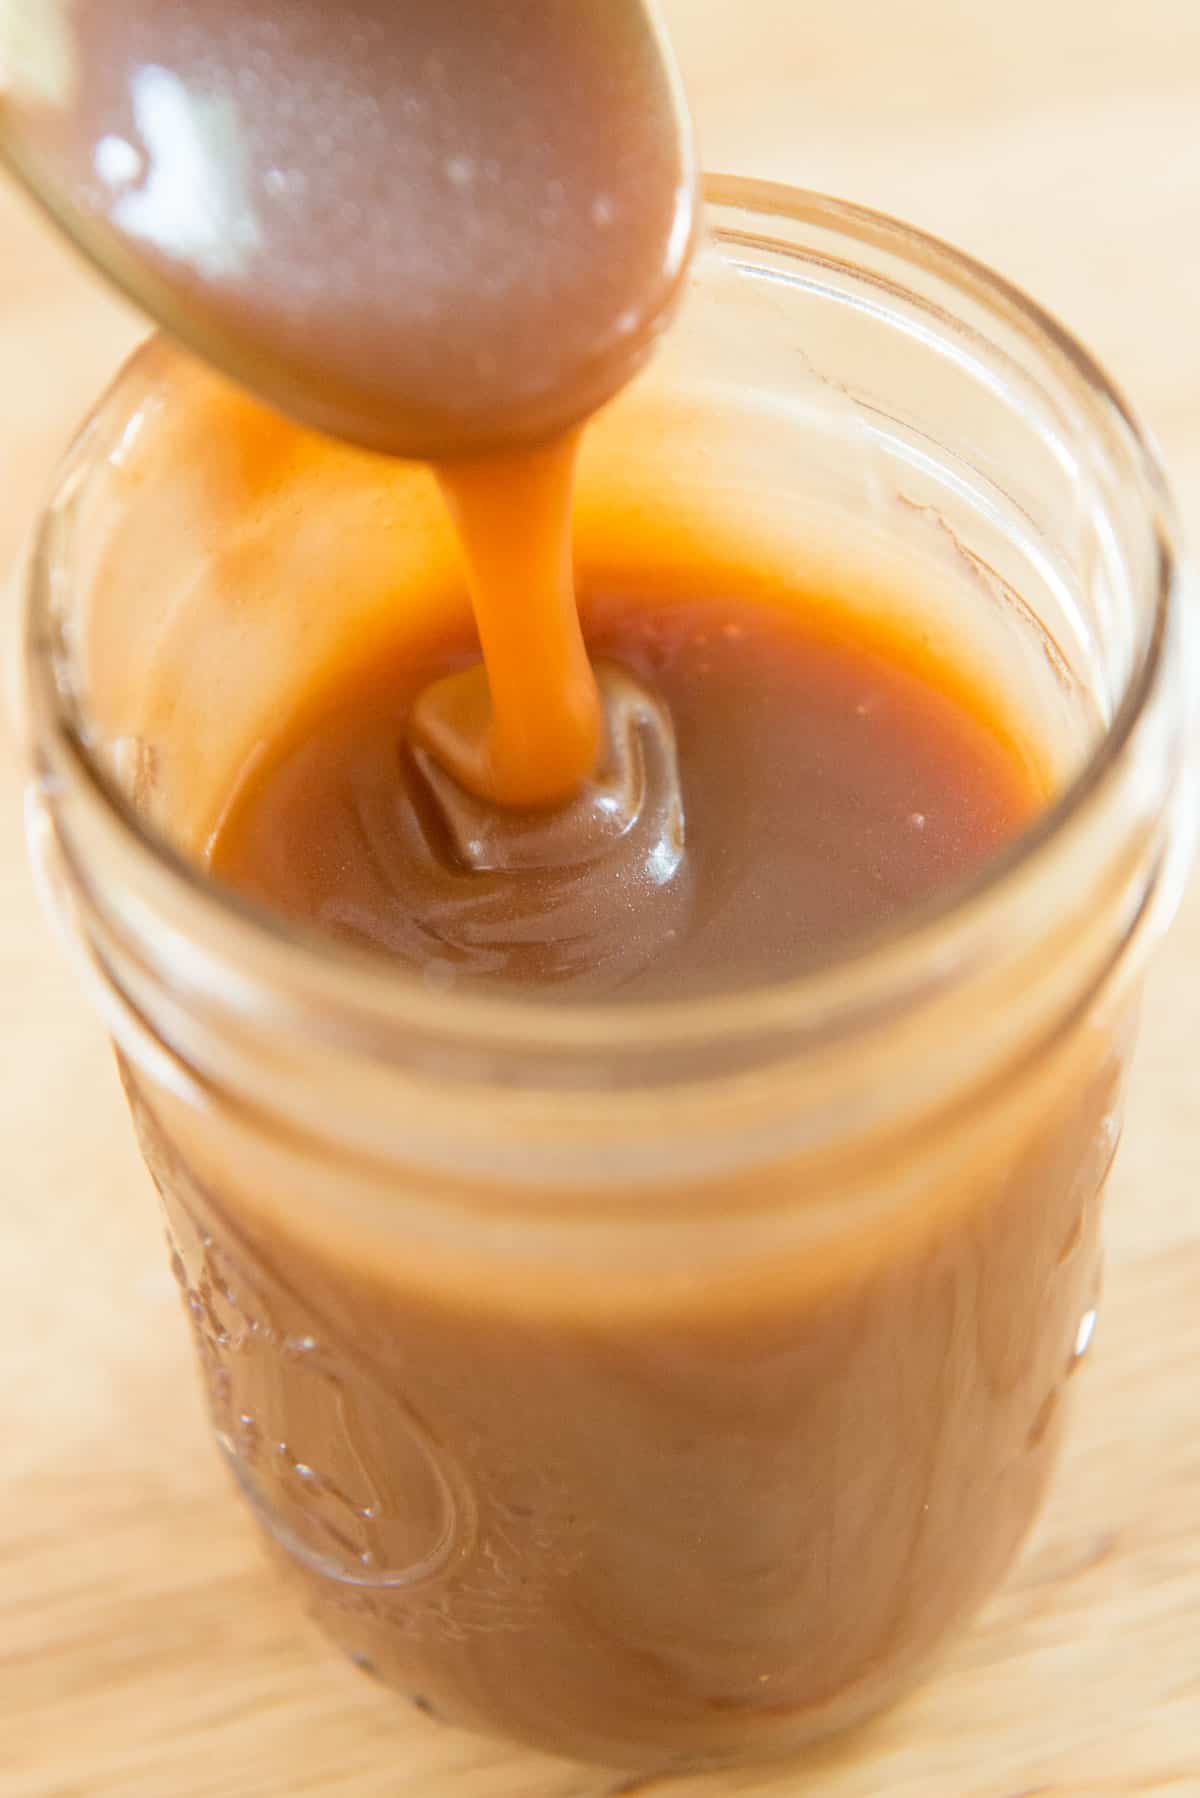 spoon drizzling homemade caramel sauce into a jar